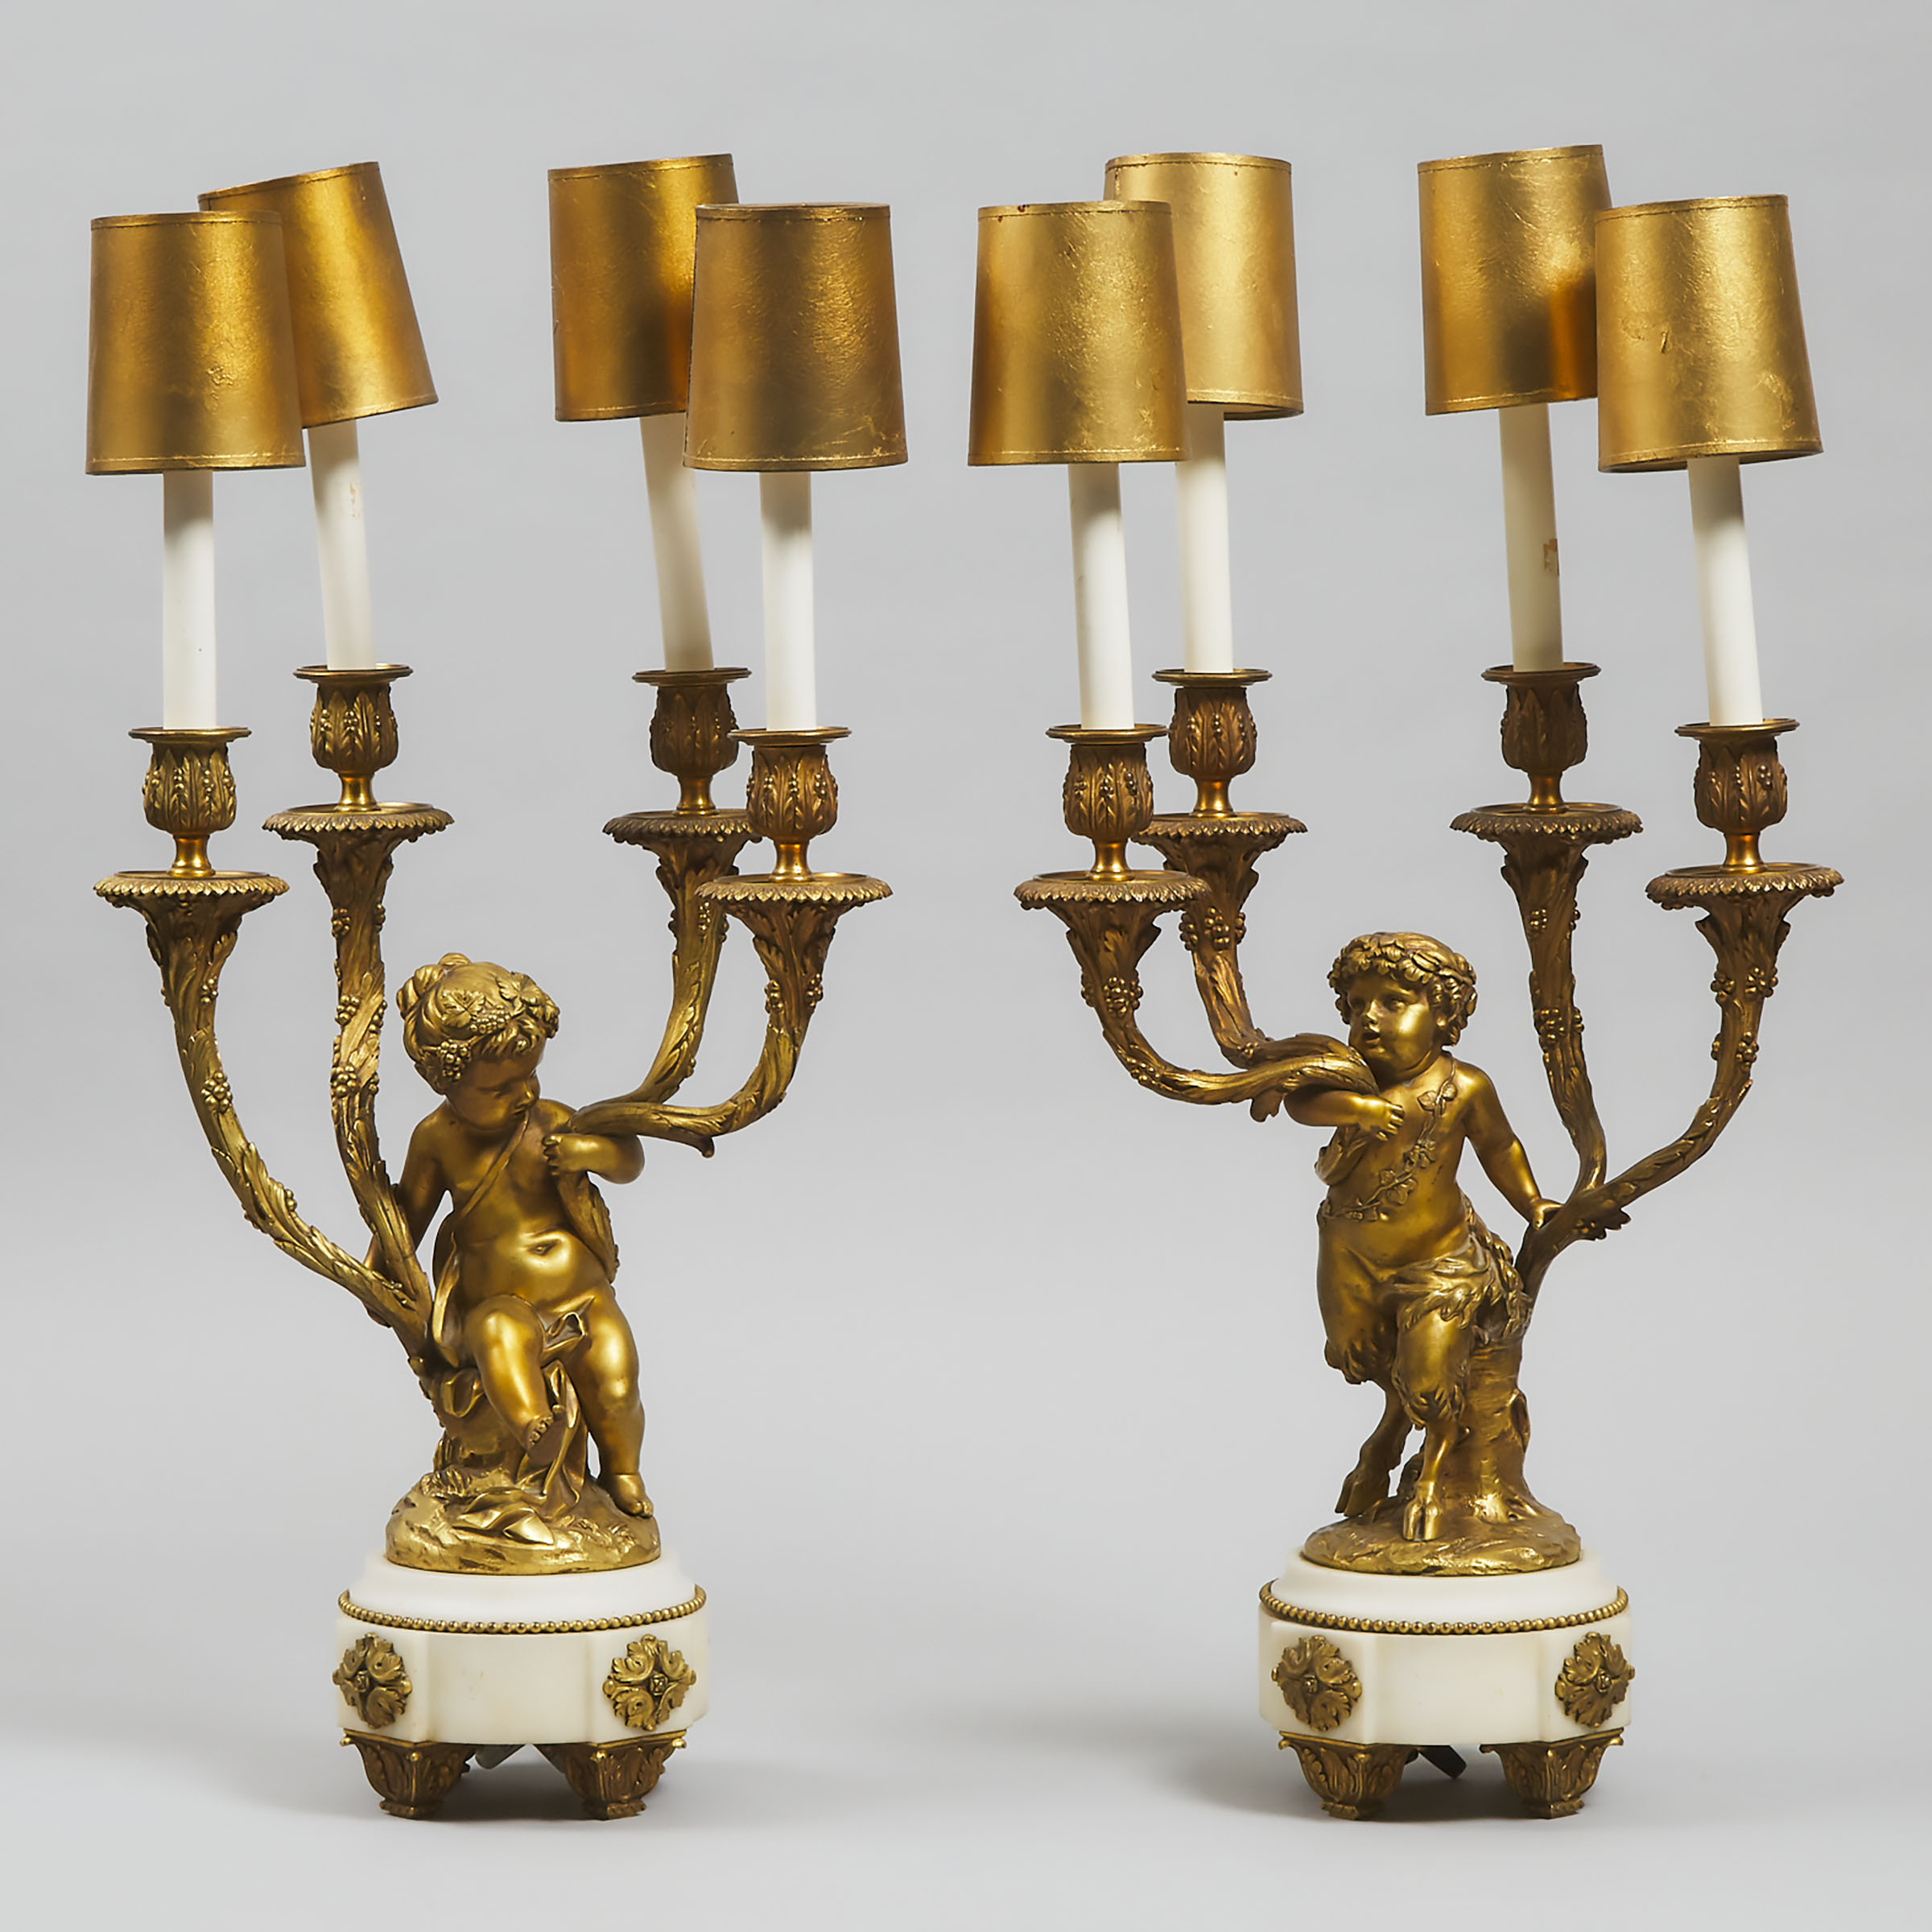 Pair of Louis XV Style Gilt Bronze and White Marble Figural Candelabras, first quarter of the 20th century